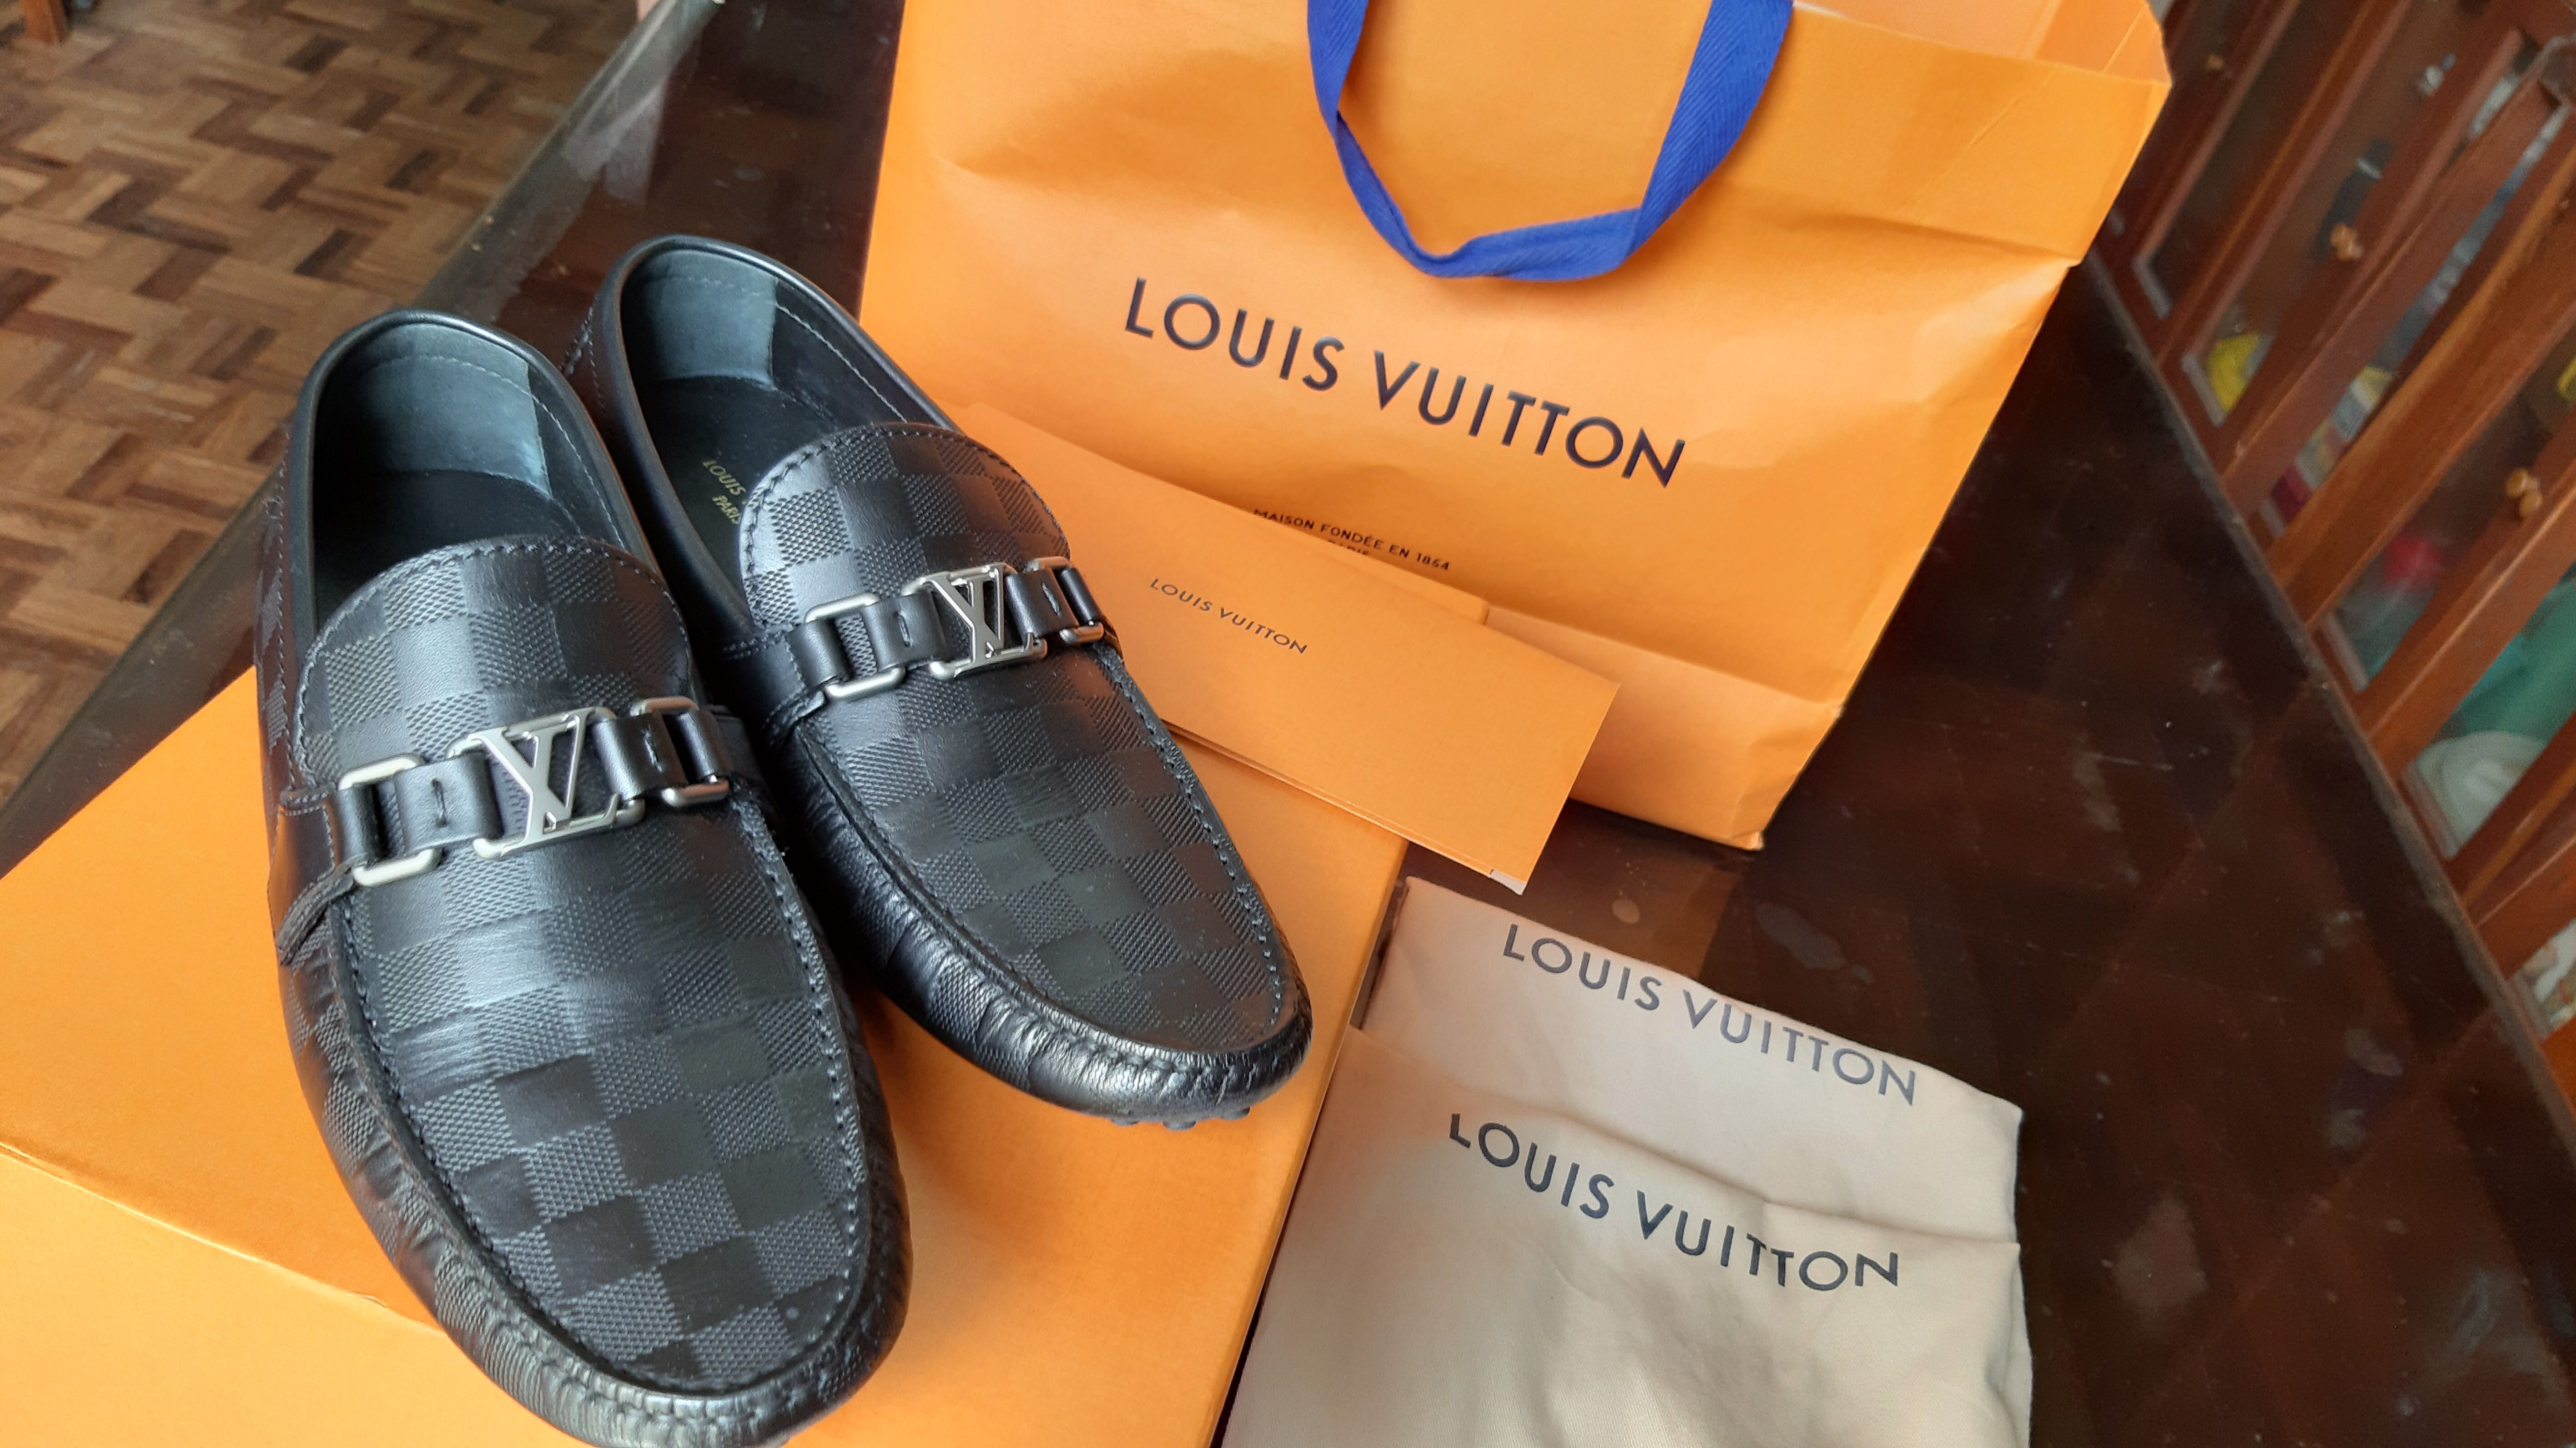 LOUIS VUITTON SHOES HOCKENHEIM MOCCASIN 13 47 CHECKERBOARD LOAFER SHOES